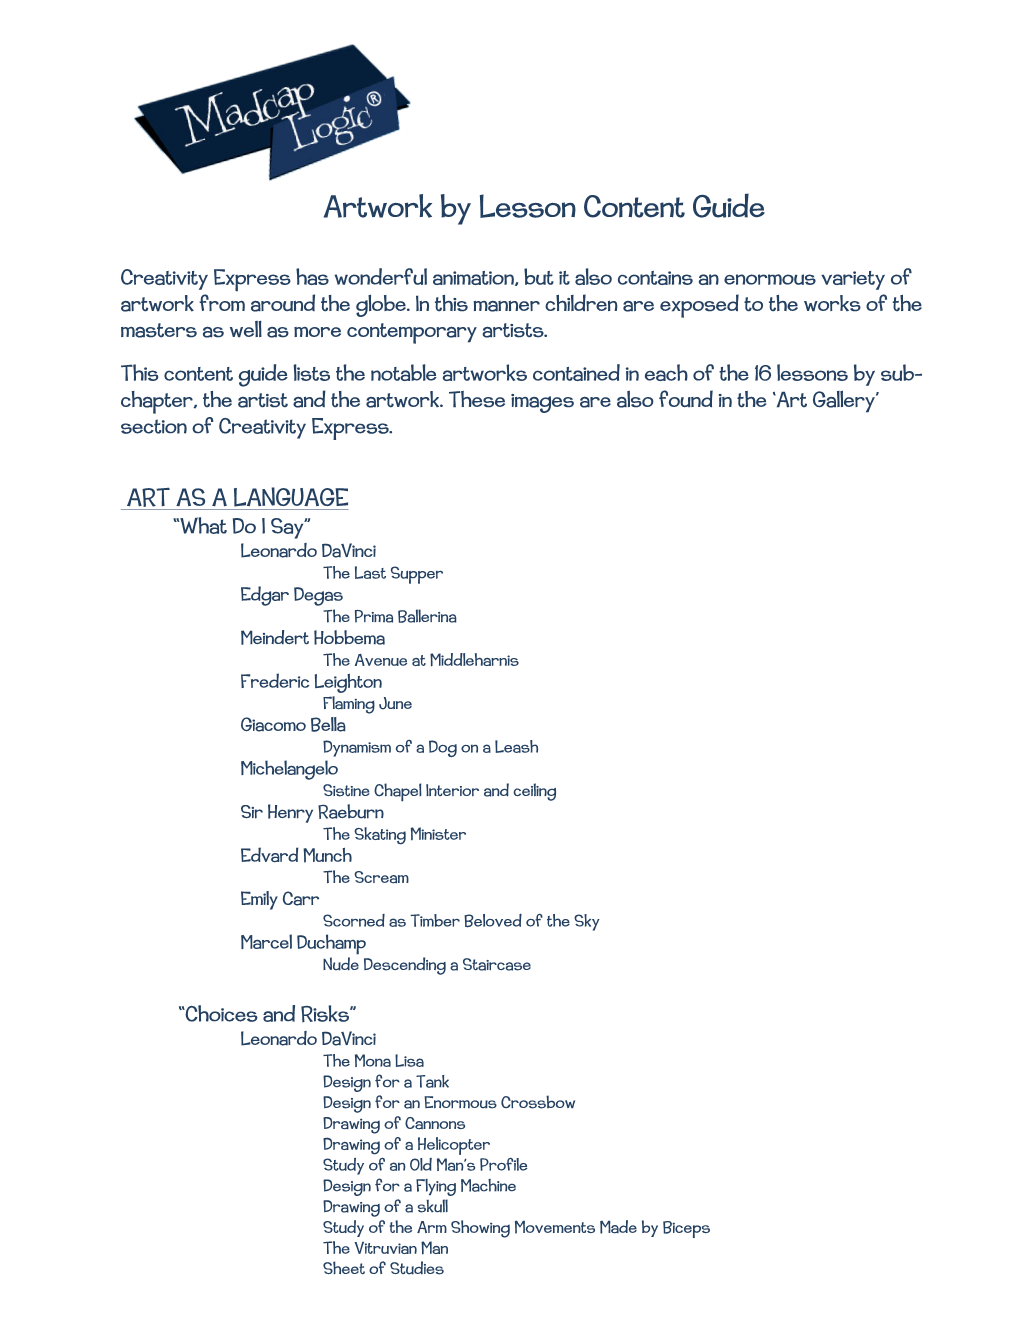 Artwork by Lesson Content Guide